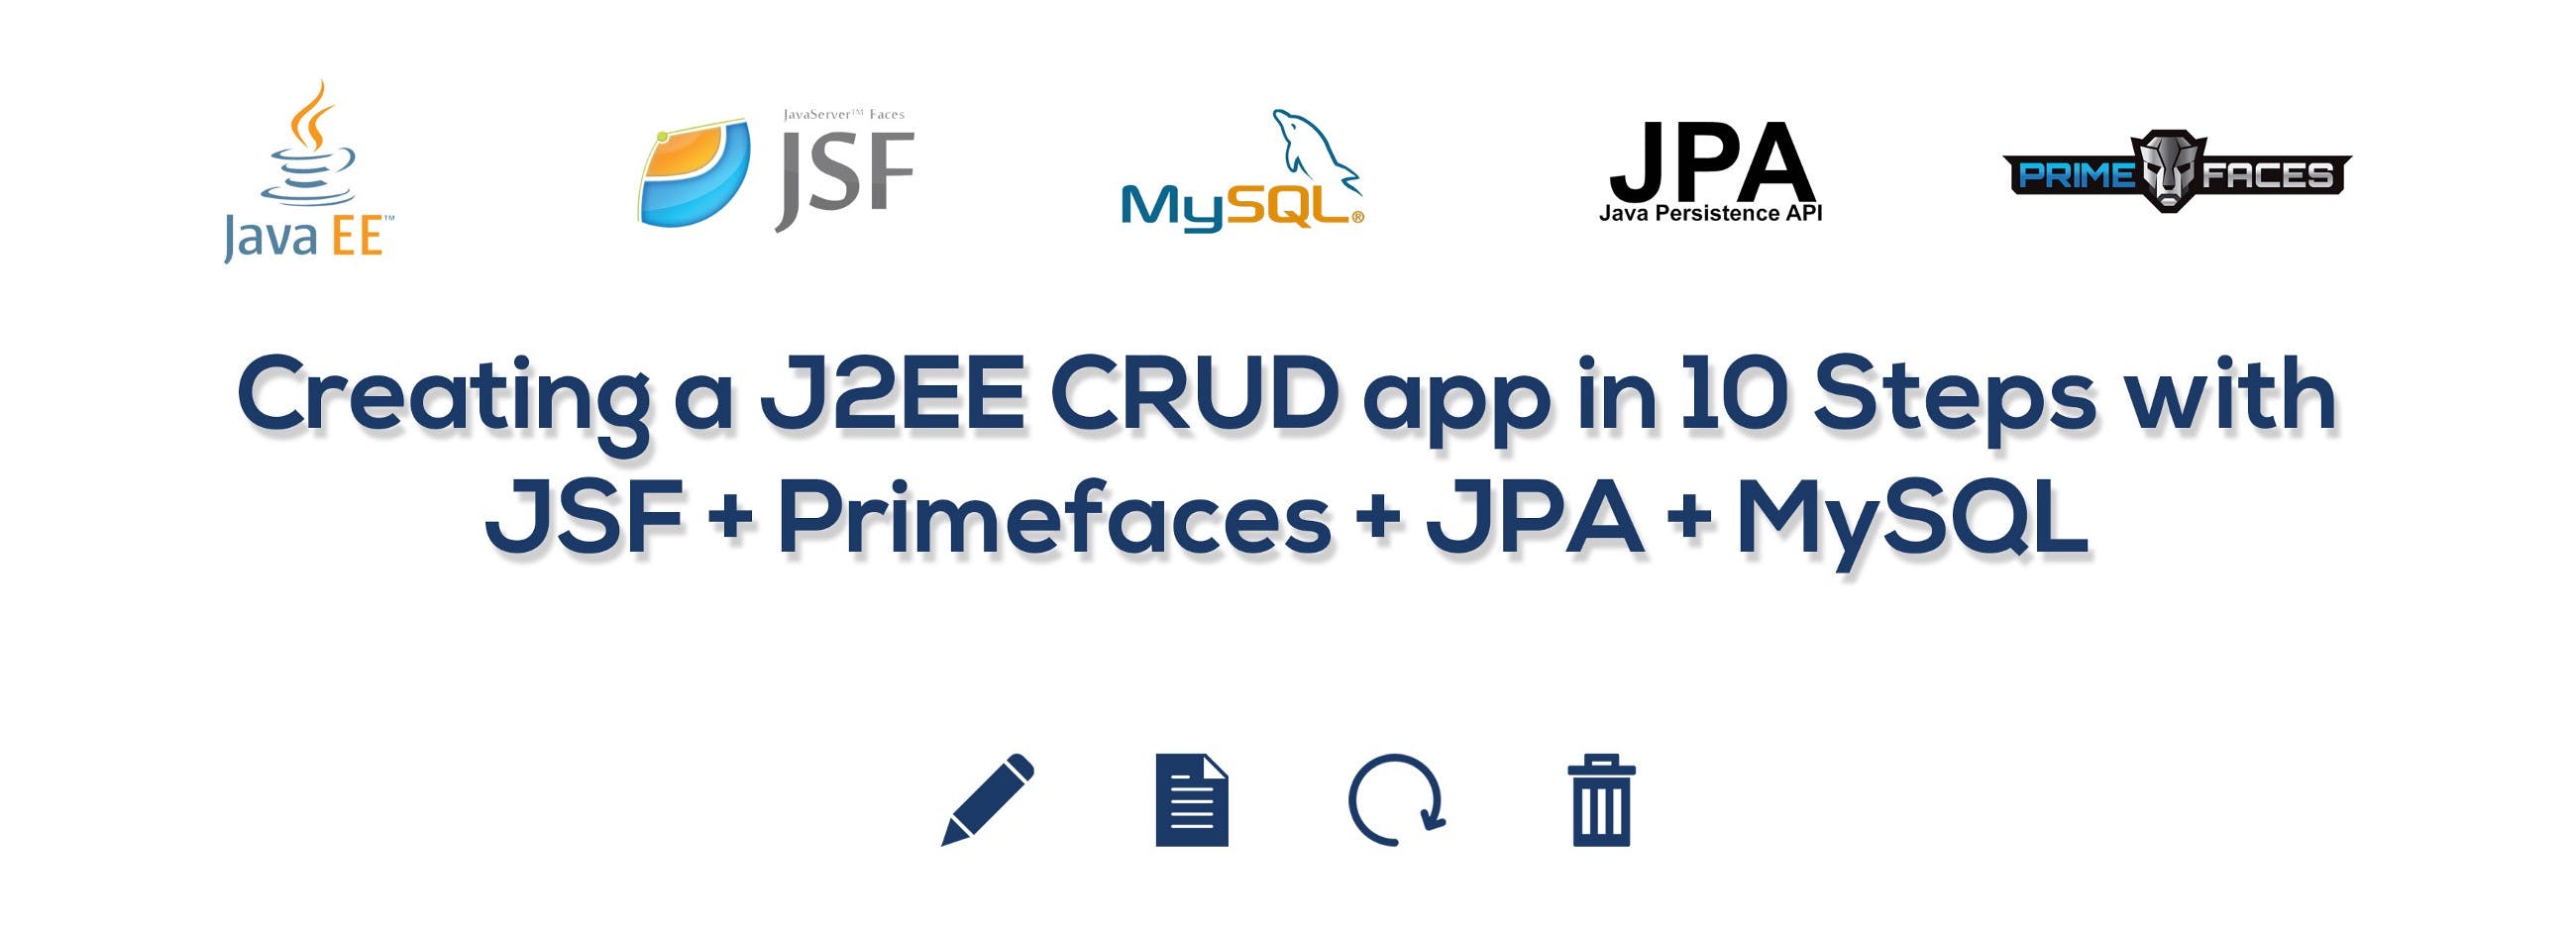 featured image - Creating a J2EE CRUD app in 10 Steps with JSF + Primefaces + JPA + MySQL